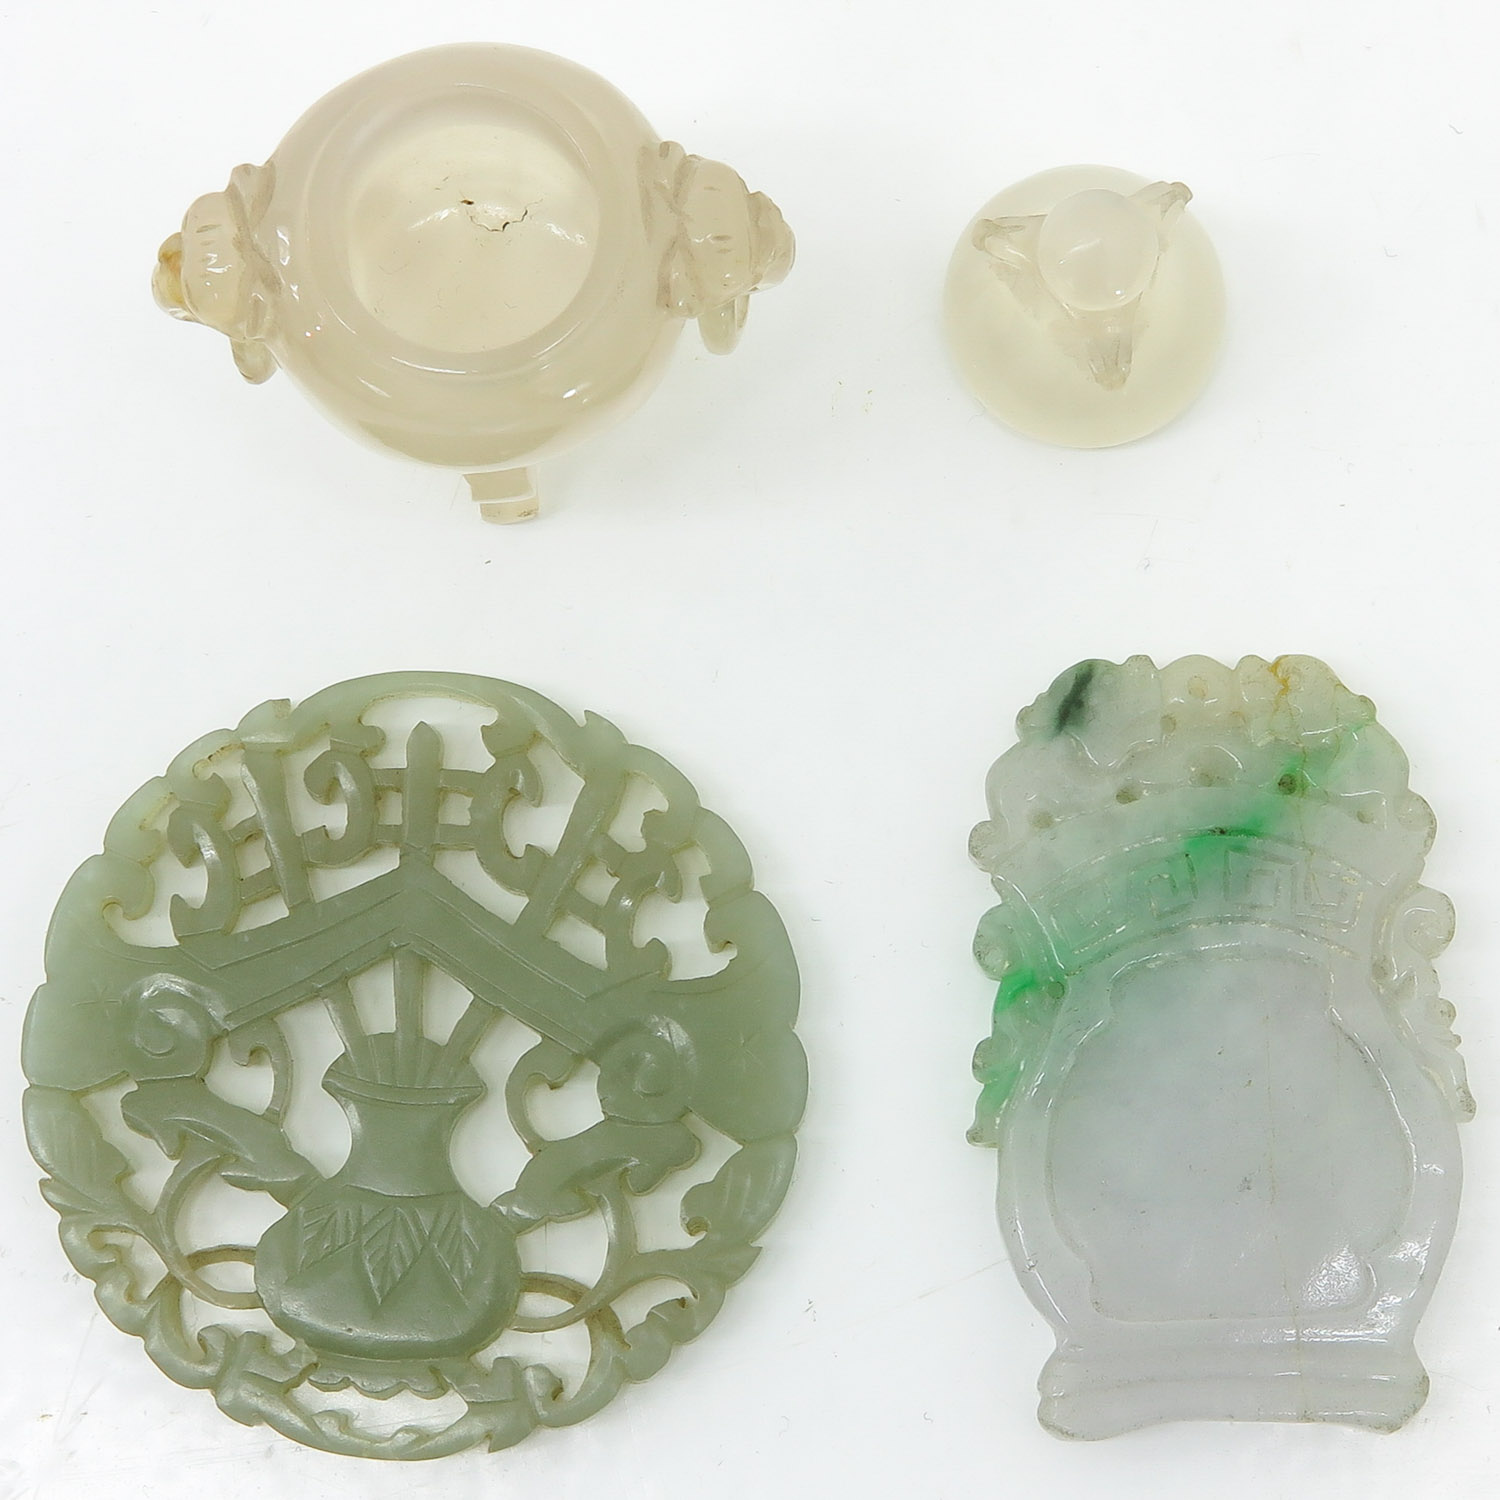 A Lot of 3 Carved Jade Items - Image 5 of 6